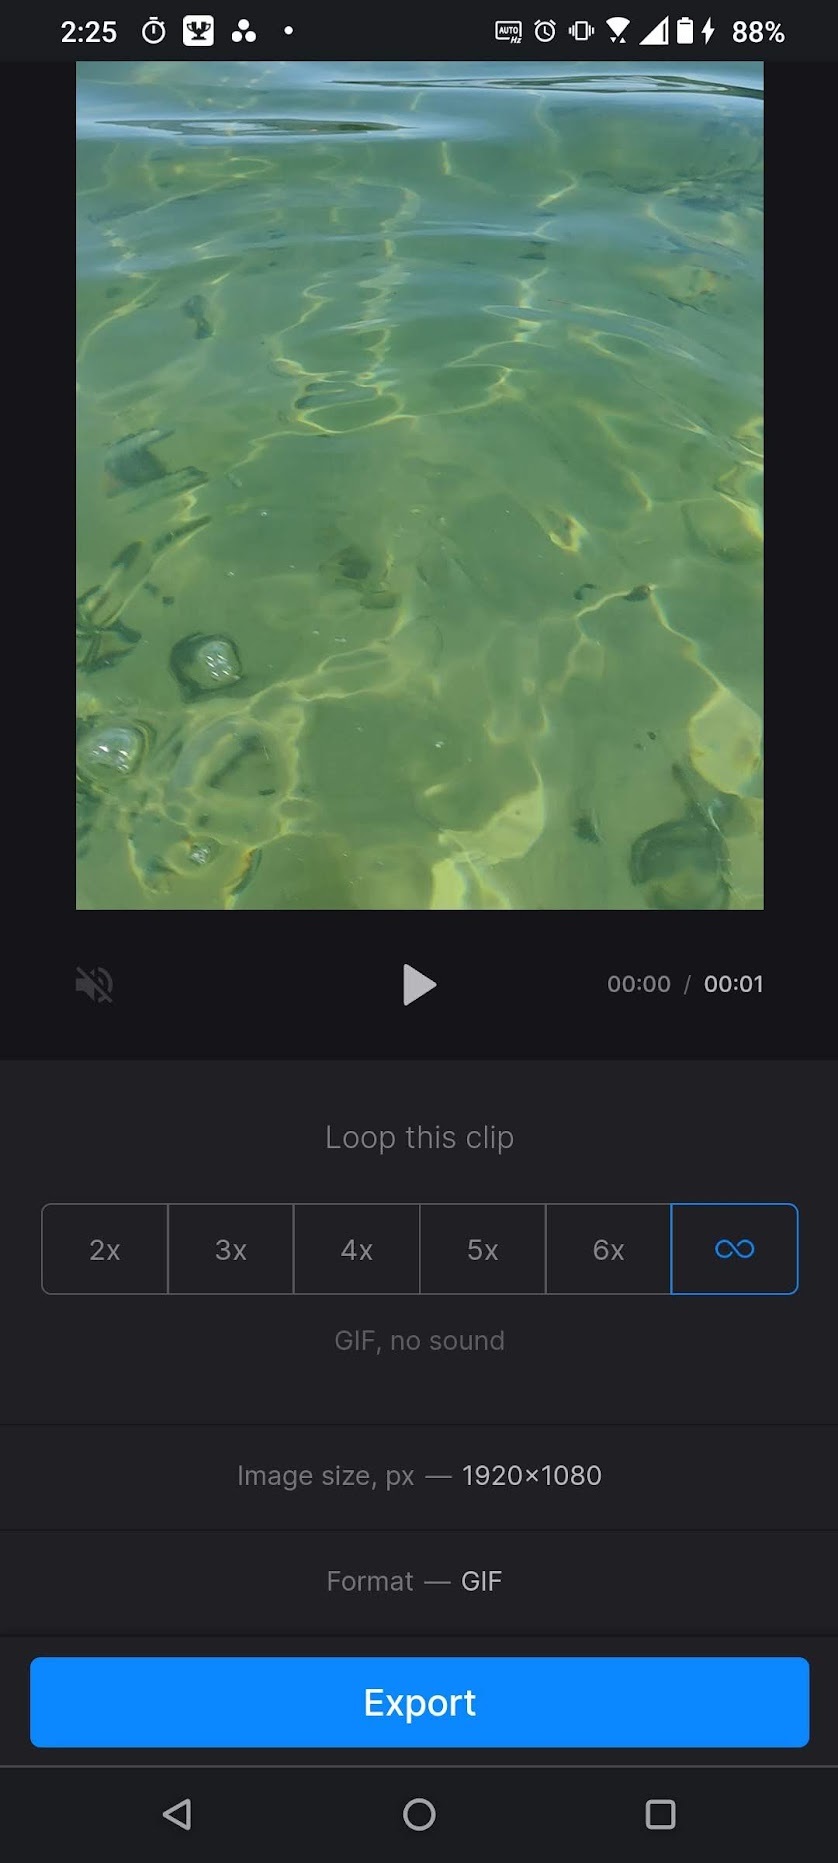 loop infinitely for a GIF clideo